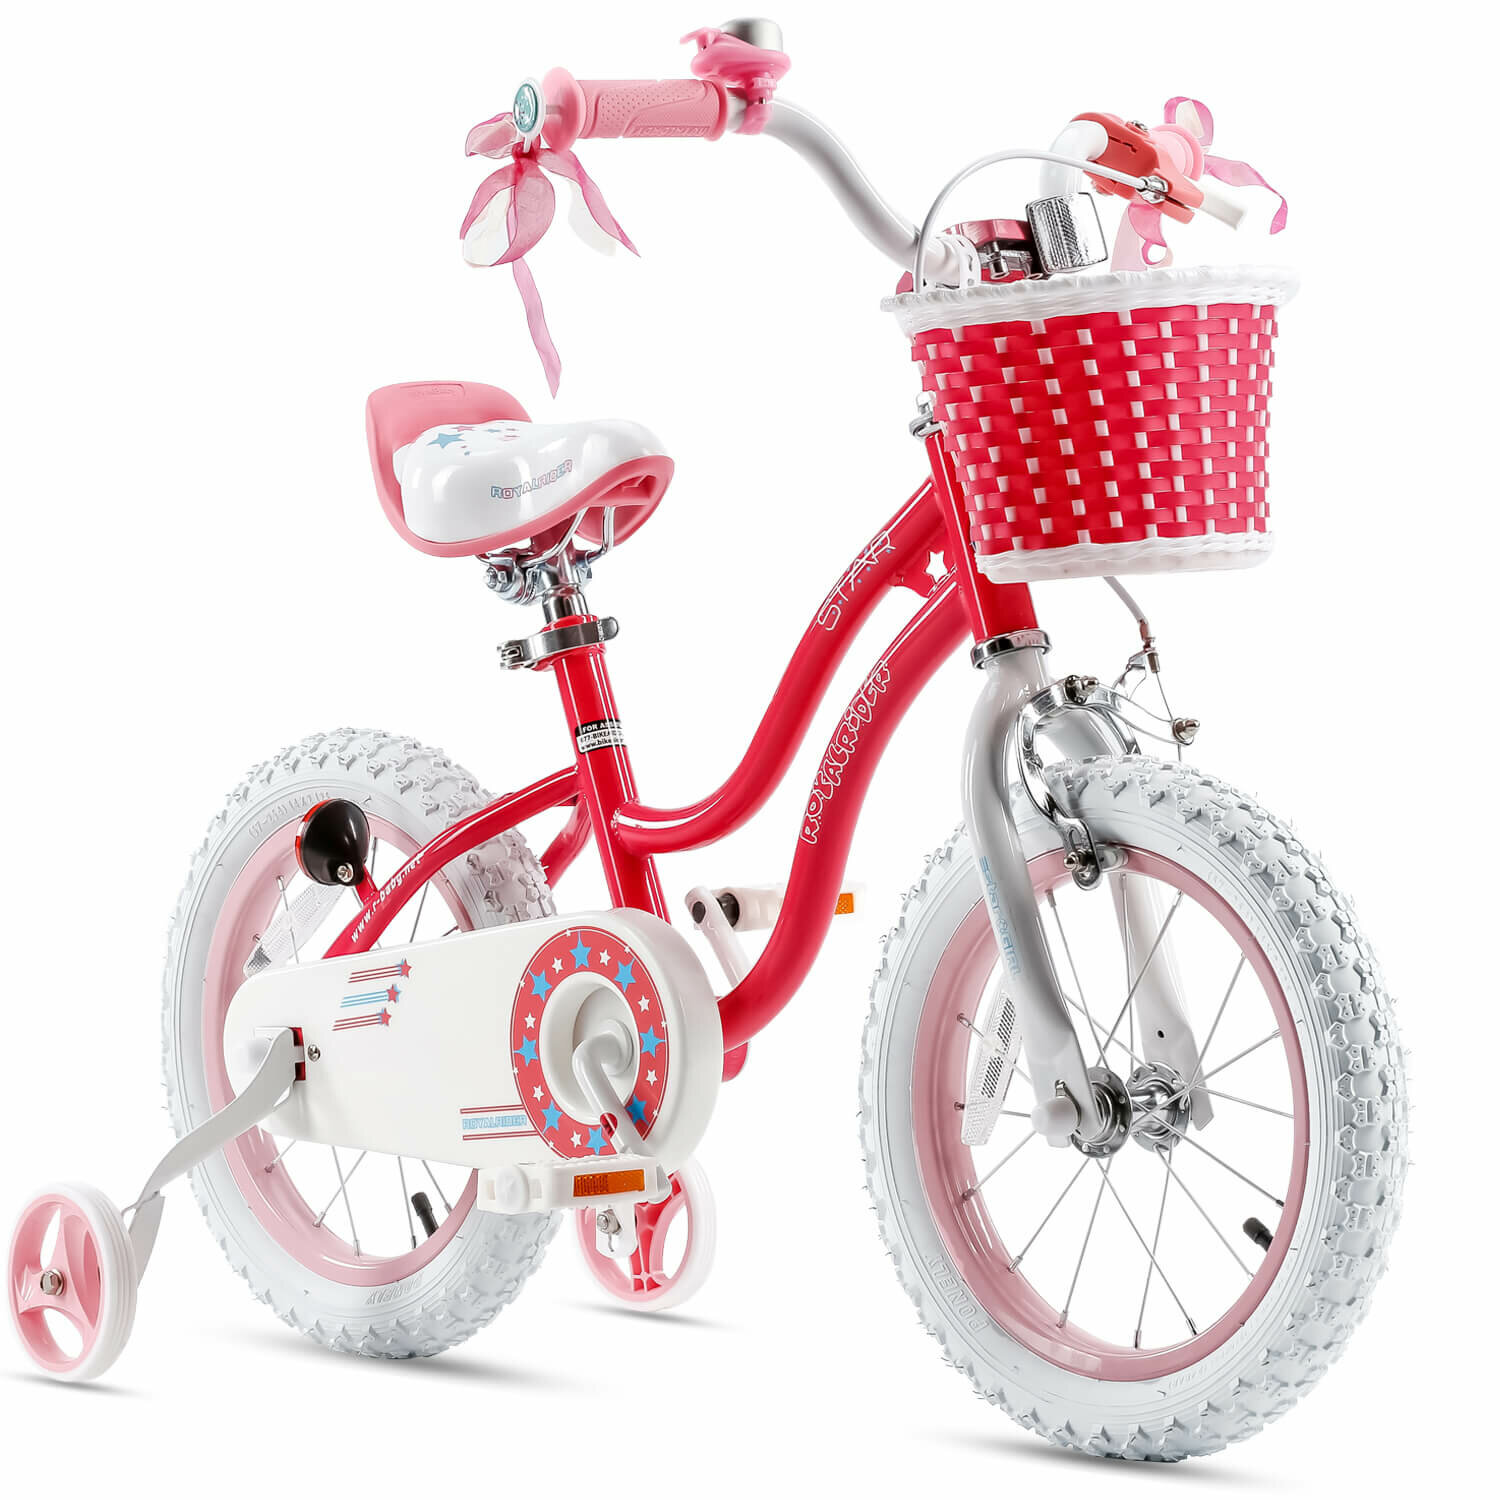 Image of [EU Direct] ROYALBABY STARGIRL 16 Inch Children's Bike Two Brake System Kids Bicycle With Kickstands&Training Wheel For